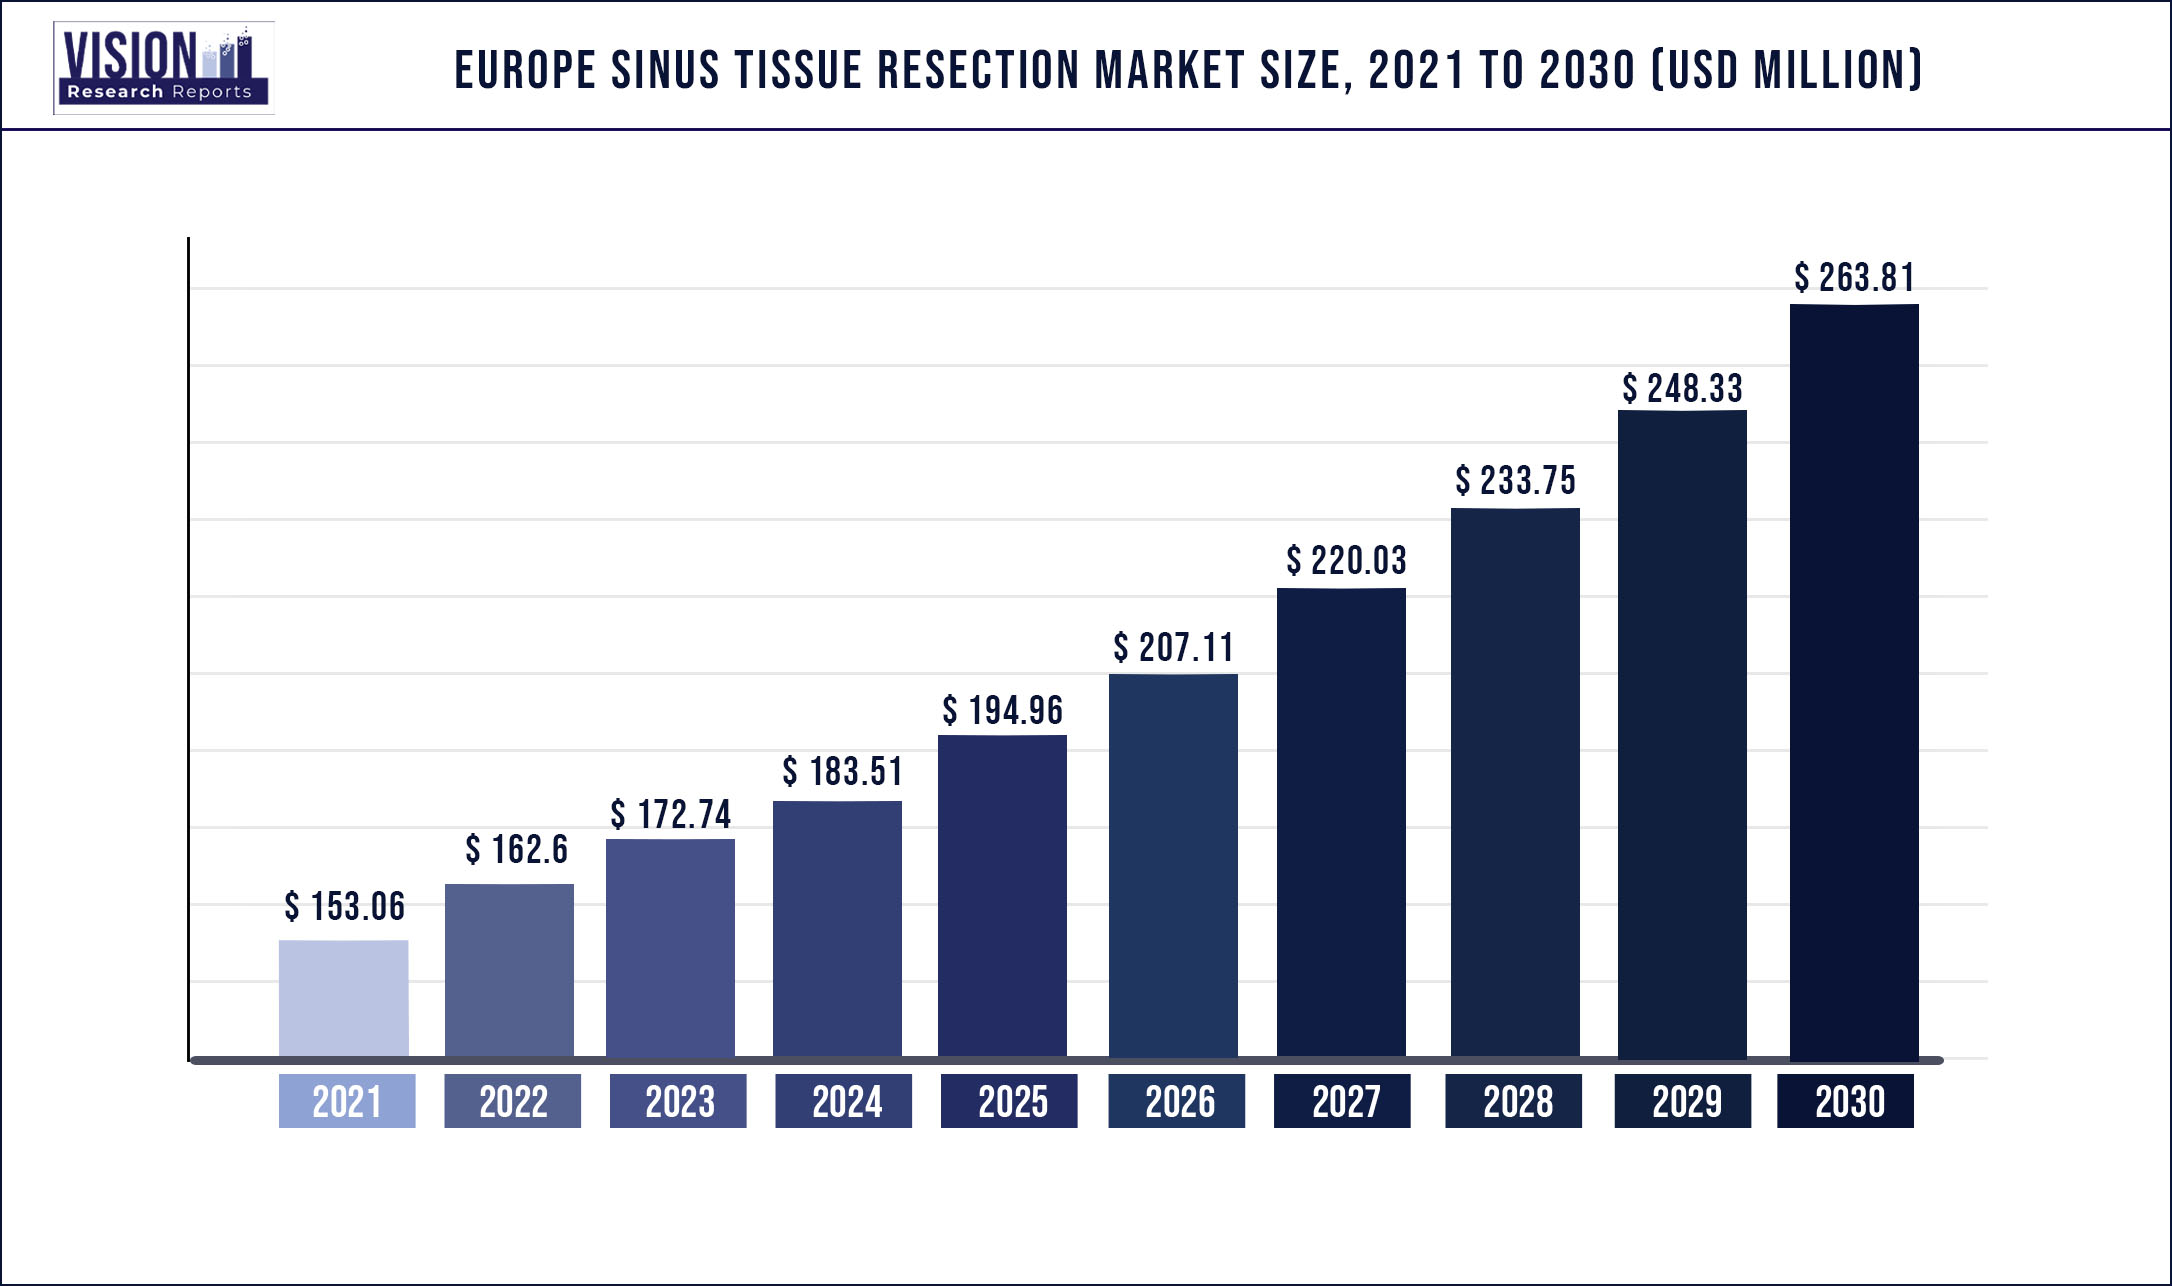 Europe Sinus Tissue Resection Market Size 2021 to 2030